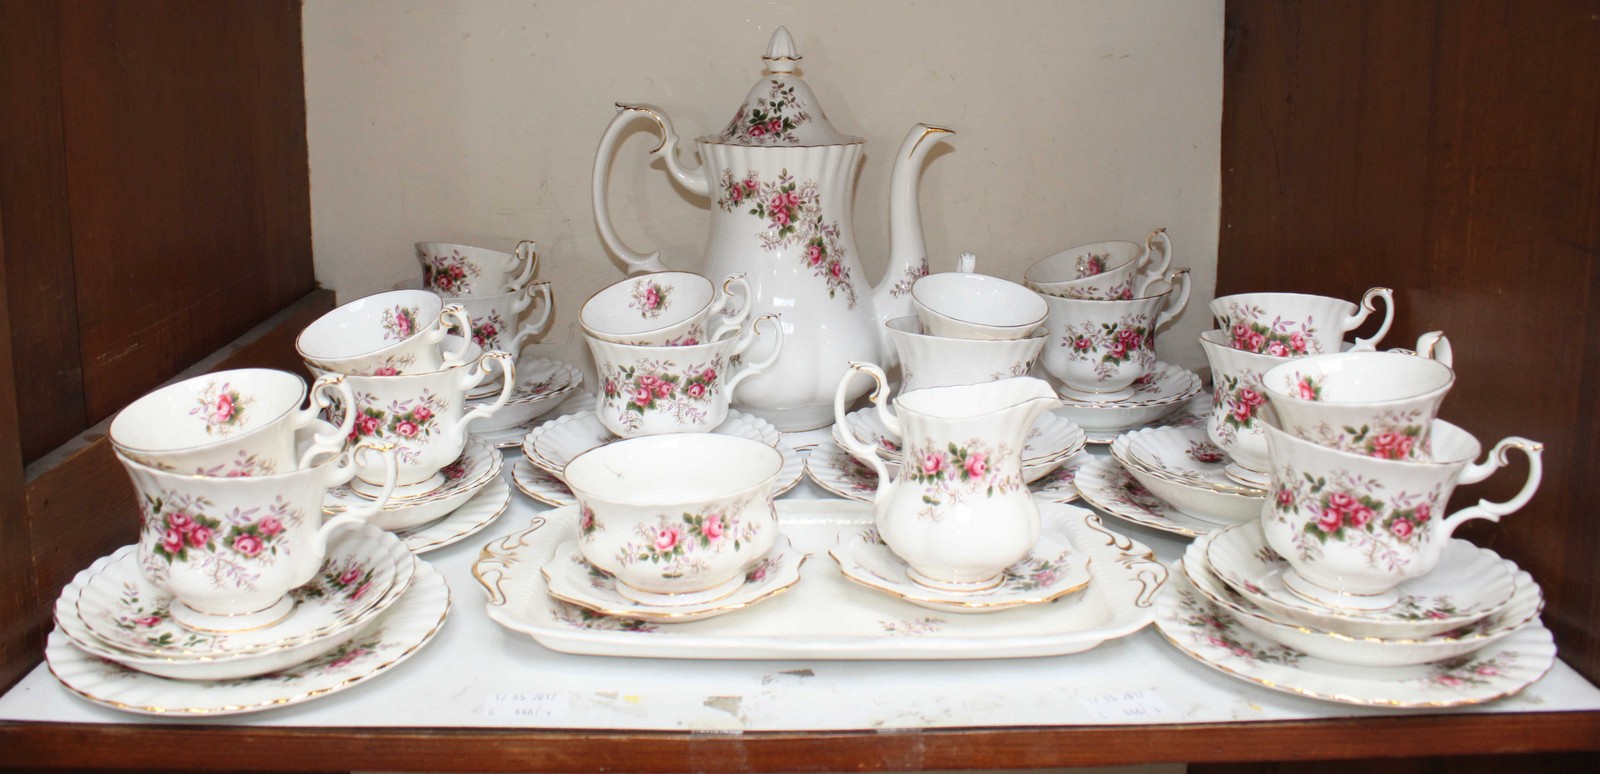 SECTION 1 & 2. An extensive Royal Albert 'Lavender Rose' pattern tea, coffee and dinner service